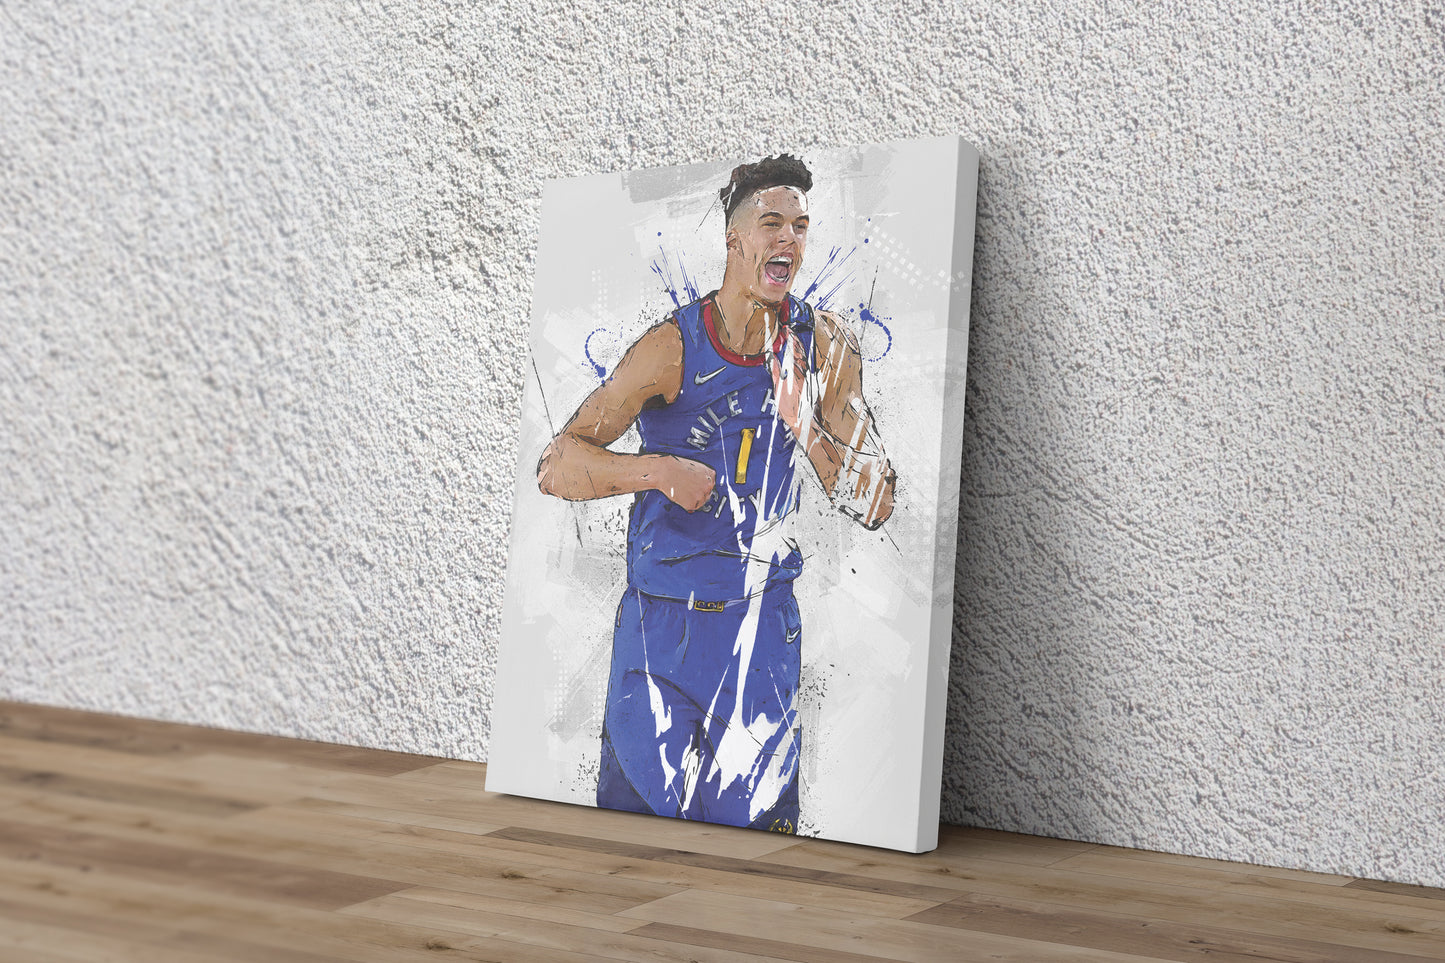 Michael Porter Jr. Poster Denver Nuggets Basketball Painting Hand Made Posters Canvas Print Wall Art Home Man Cave Gift Decor